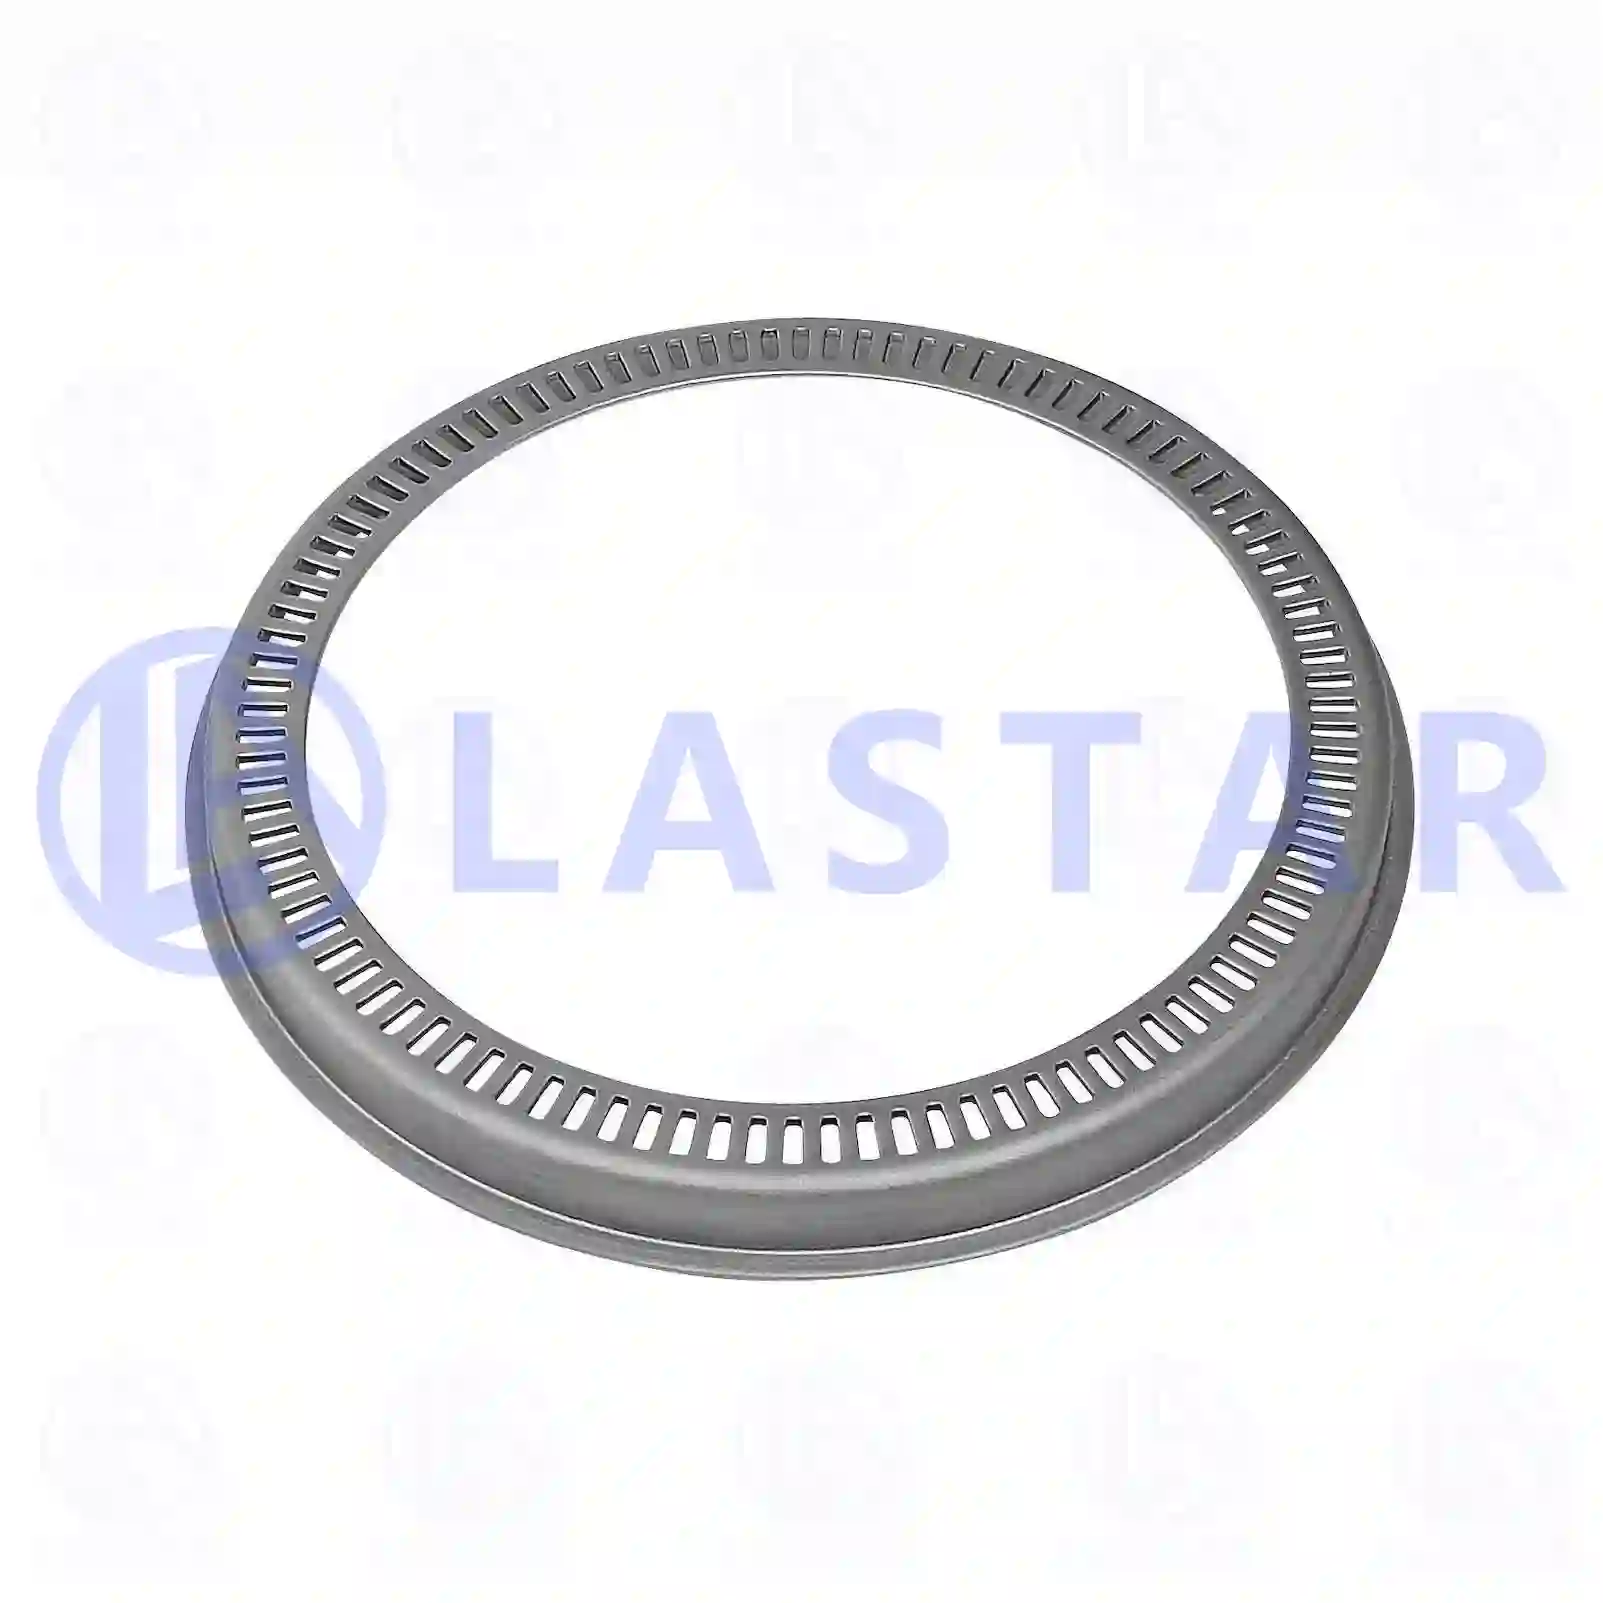 ABS ring, 77726374, 9433340115, ZG50016-0008, , ||  77726374 Lastar Spare Part | Truck Spare Parts, Auotomotive Spare Parts ABS ring, 77726374, 9433340115, ZG50016-0008, , ||  77726374 Lastar Spare Part | Truck Spare Parts, Auotomotive Spare Parts